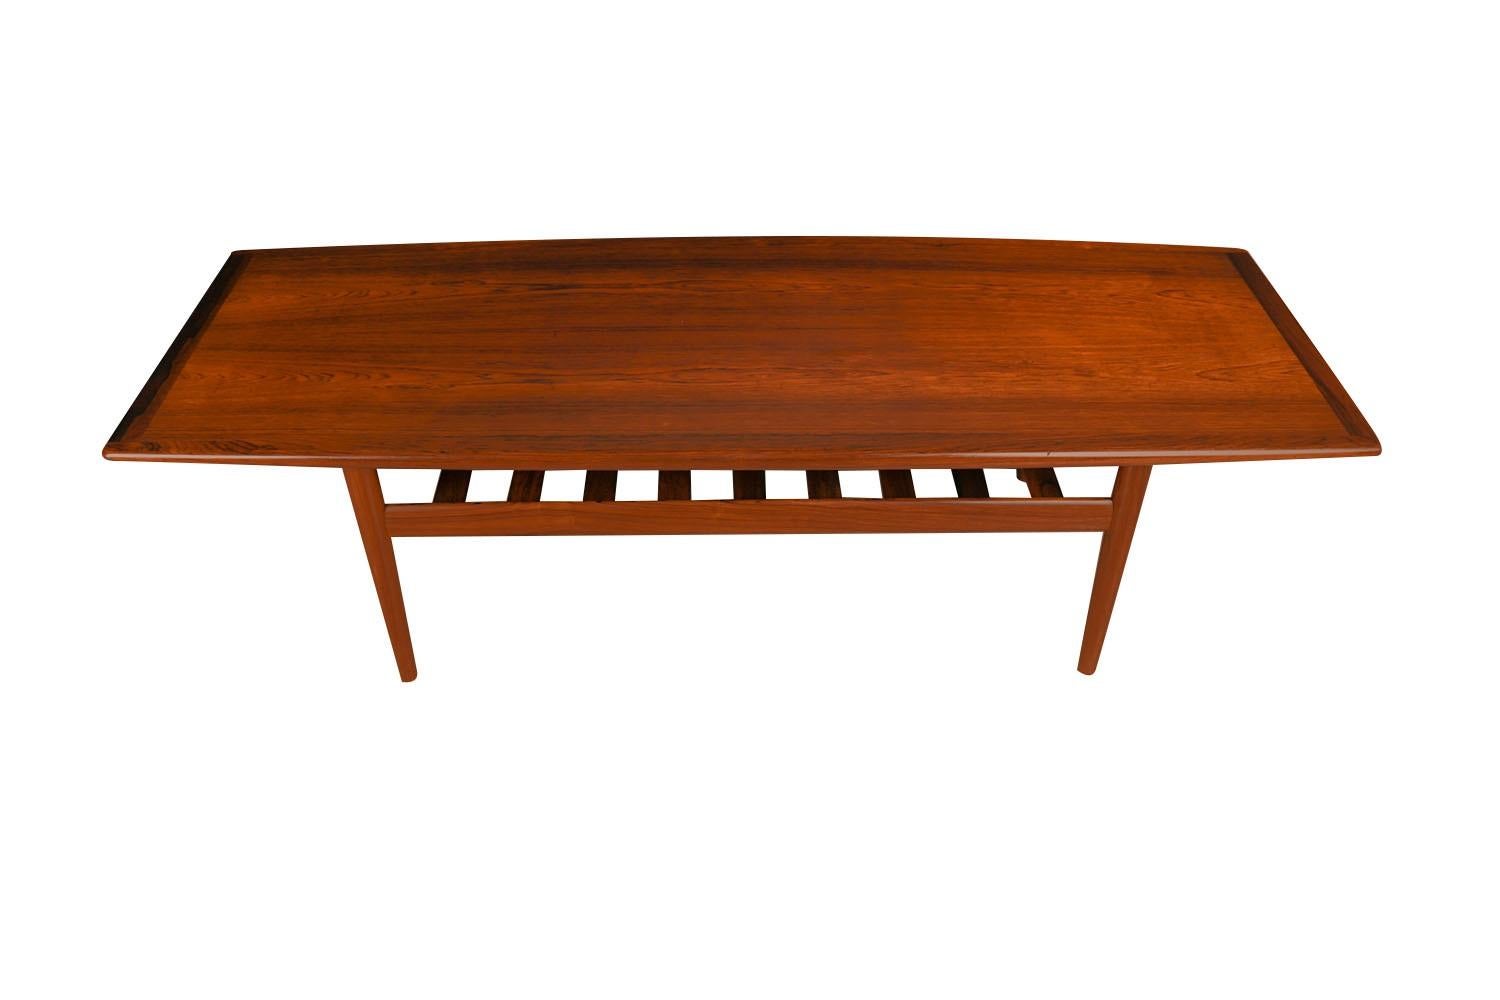 A beautiful mid-century modern, rosewood Danish coffee table by Grete Jalk for Glostrup Mobelfabrik, circa 1960's. The perfect length to pair with an extra long sofa. Features a rectangular top with a sculpted edge trim that runs the length of the